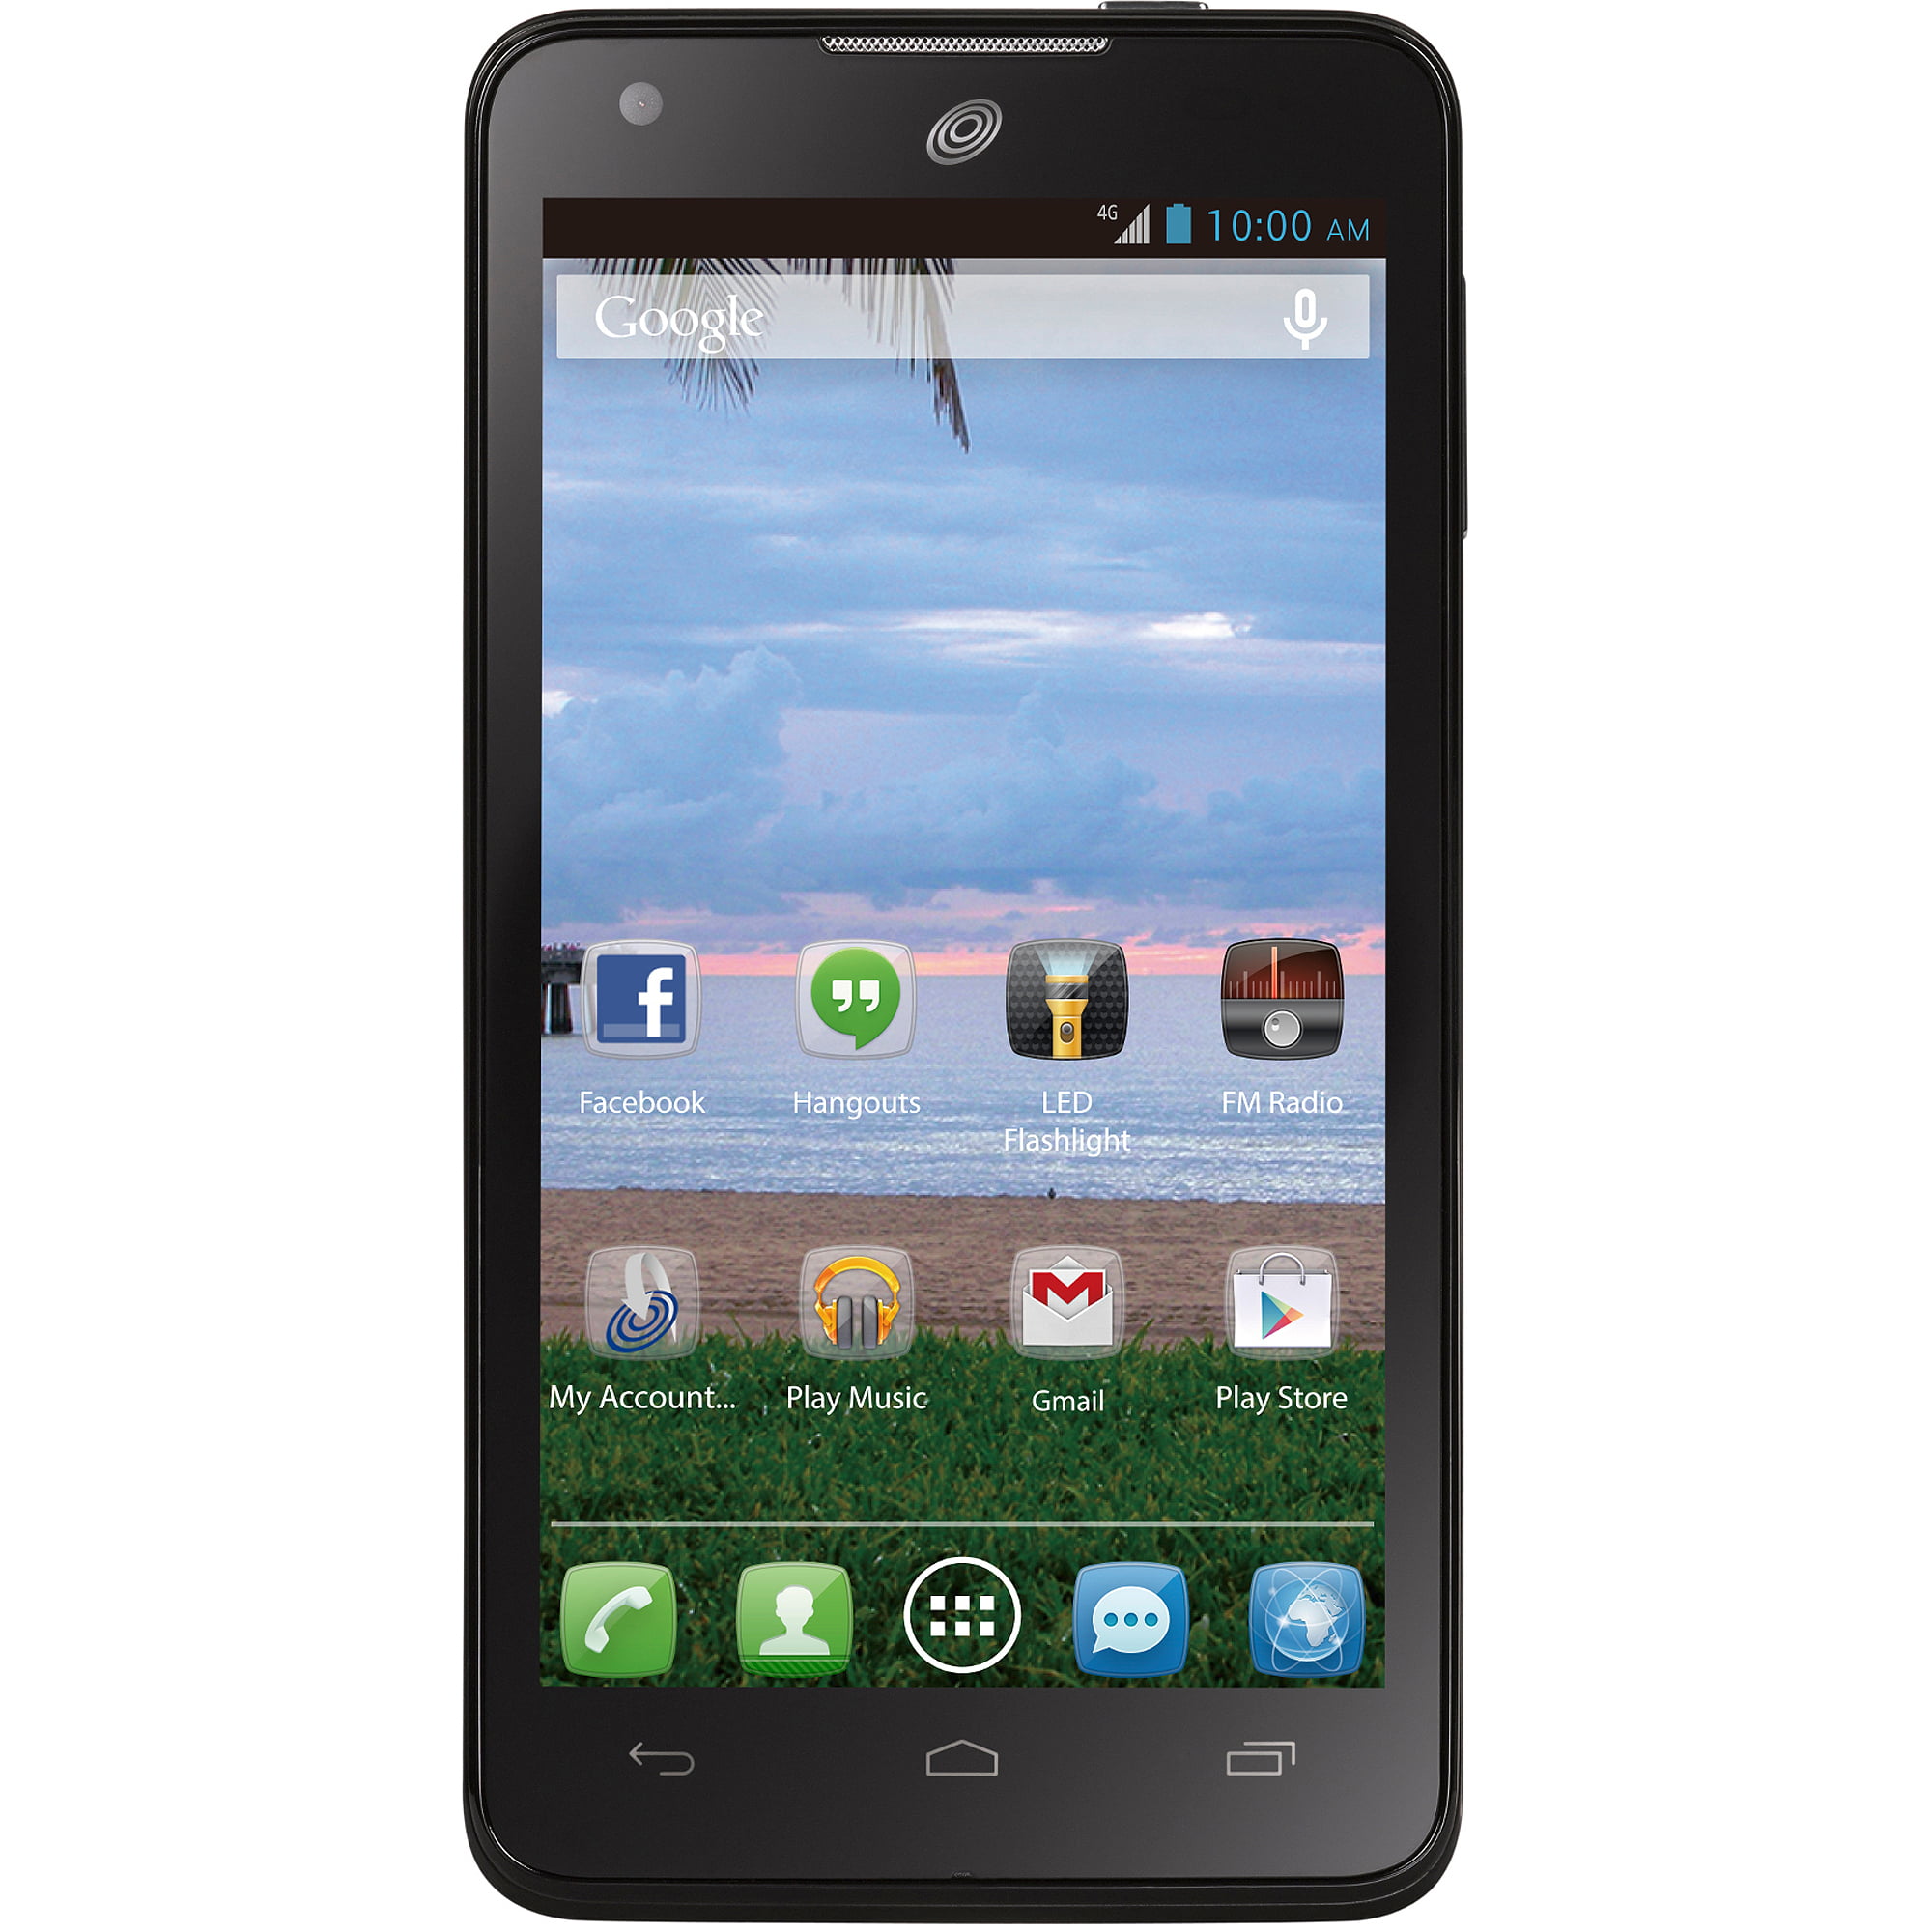 What are some examples of cell phones offered by Alcatel?